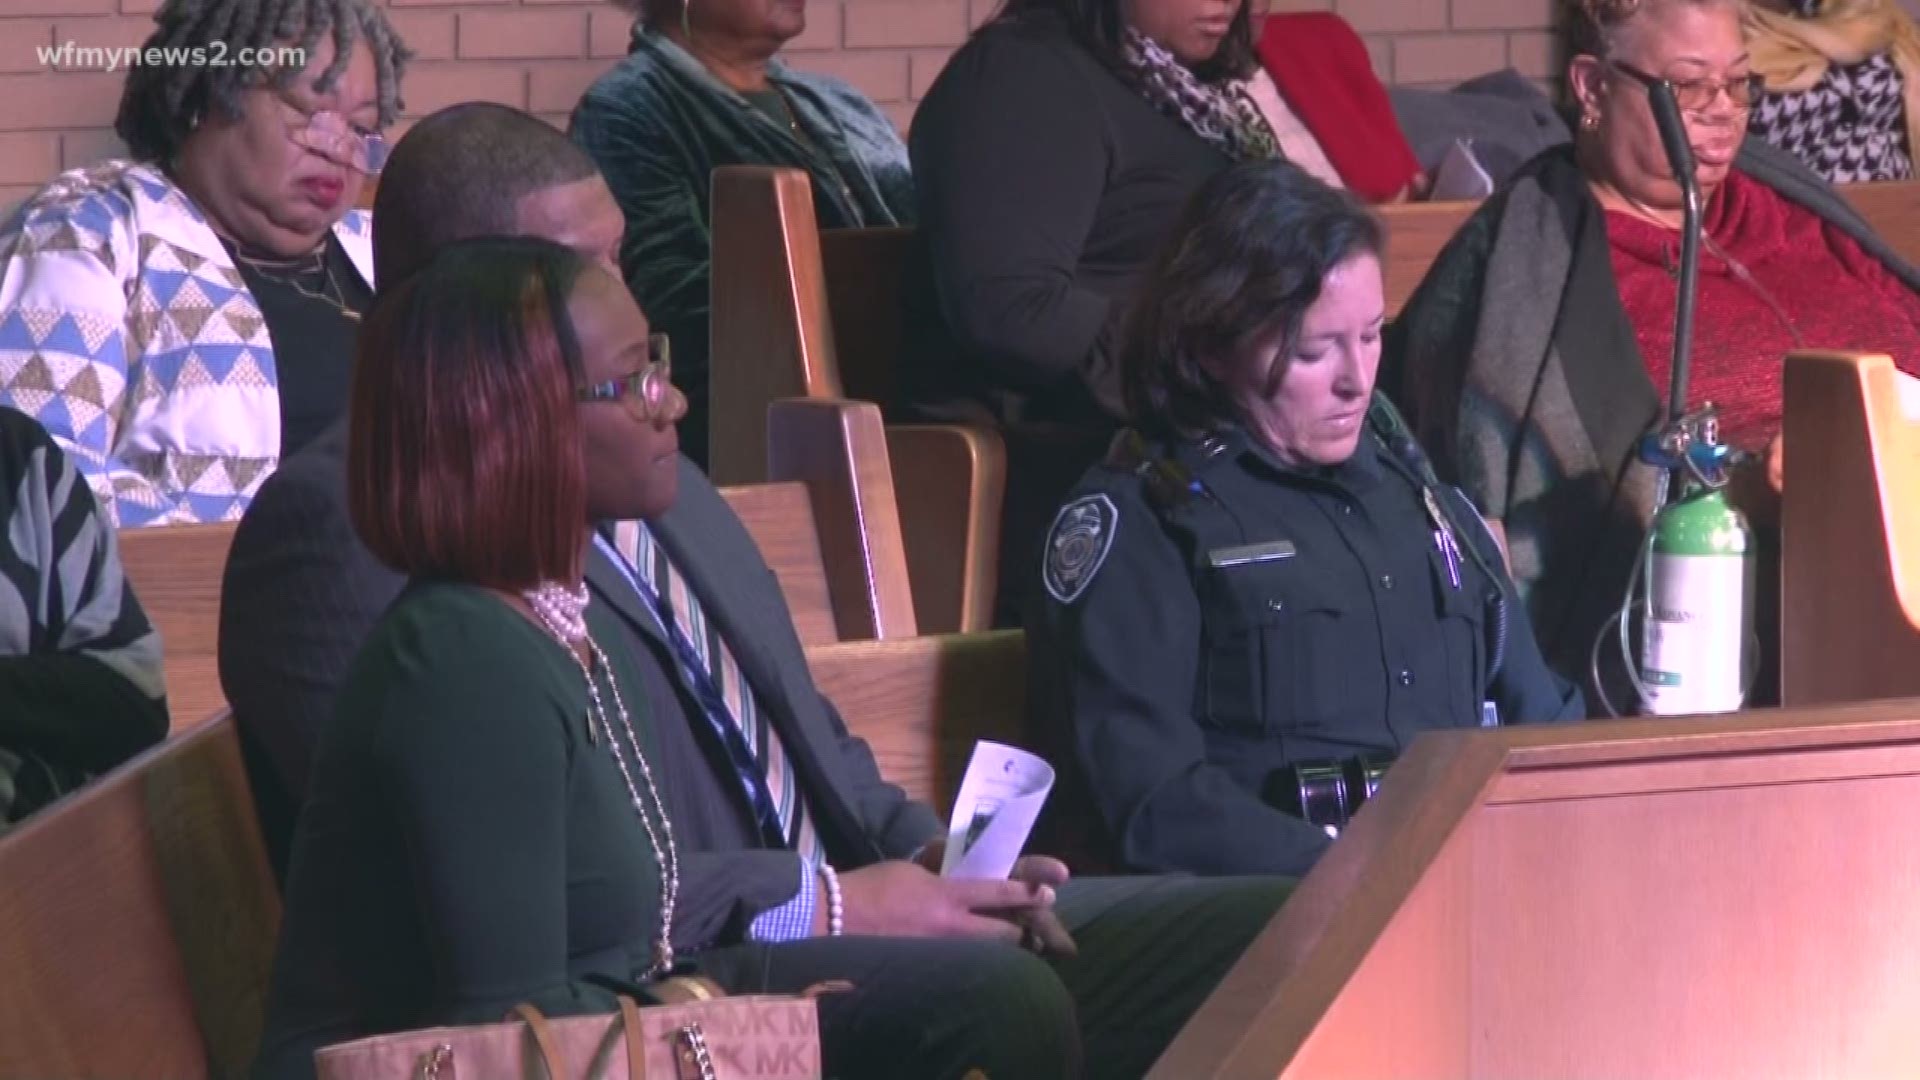 After stopping a school shooting over a month ago, 3 heroes were honored at a Greensboro church